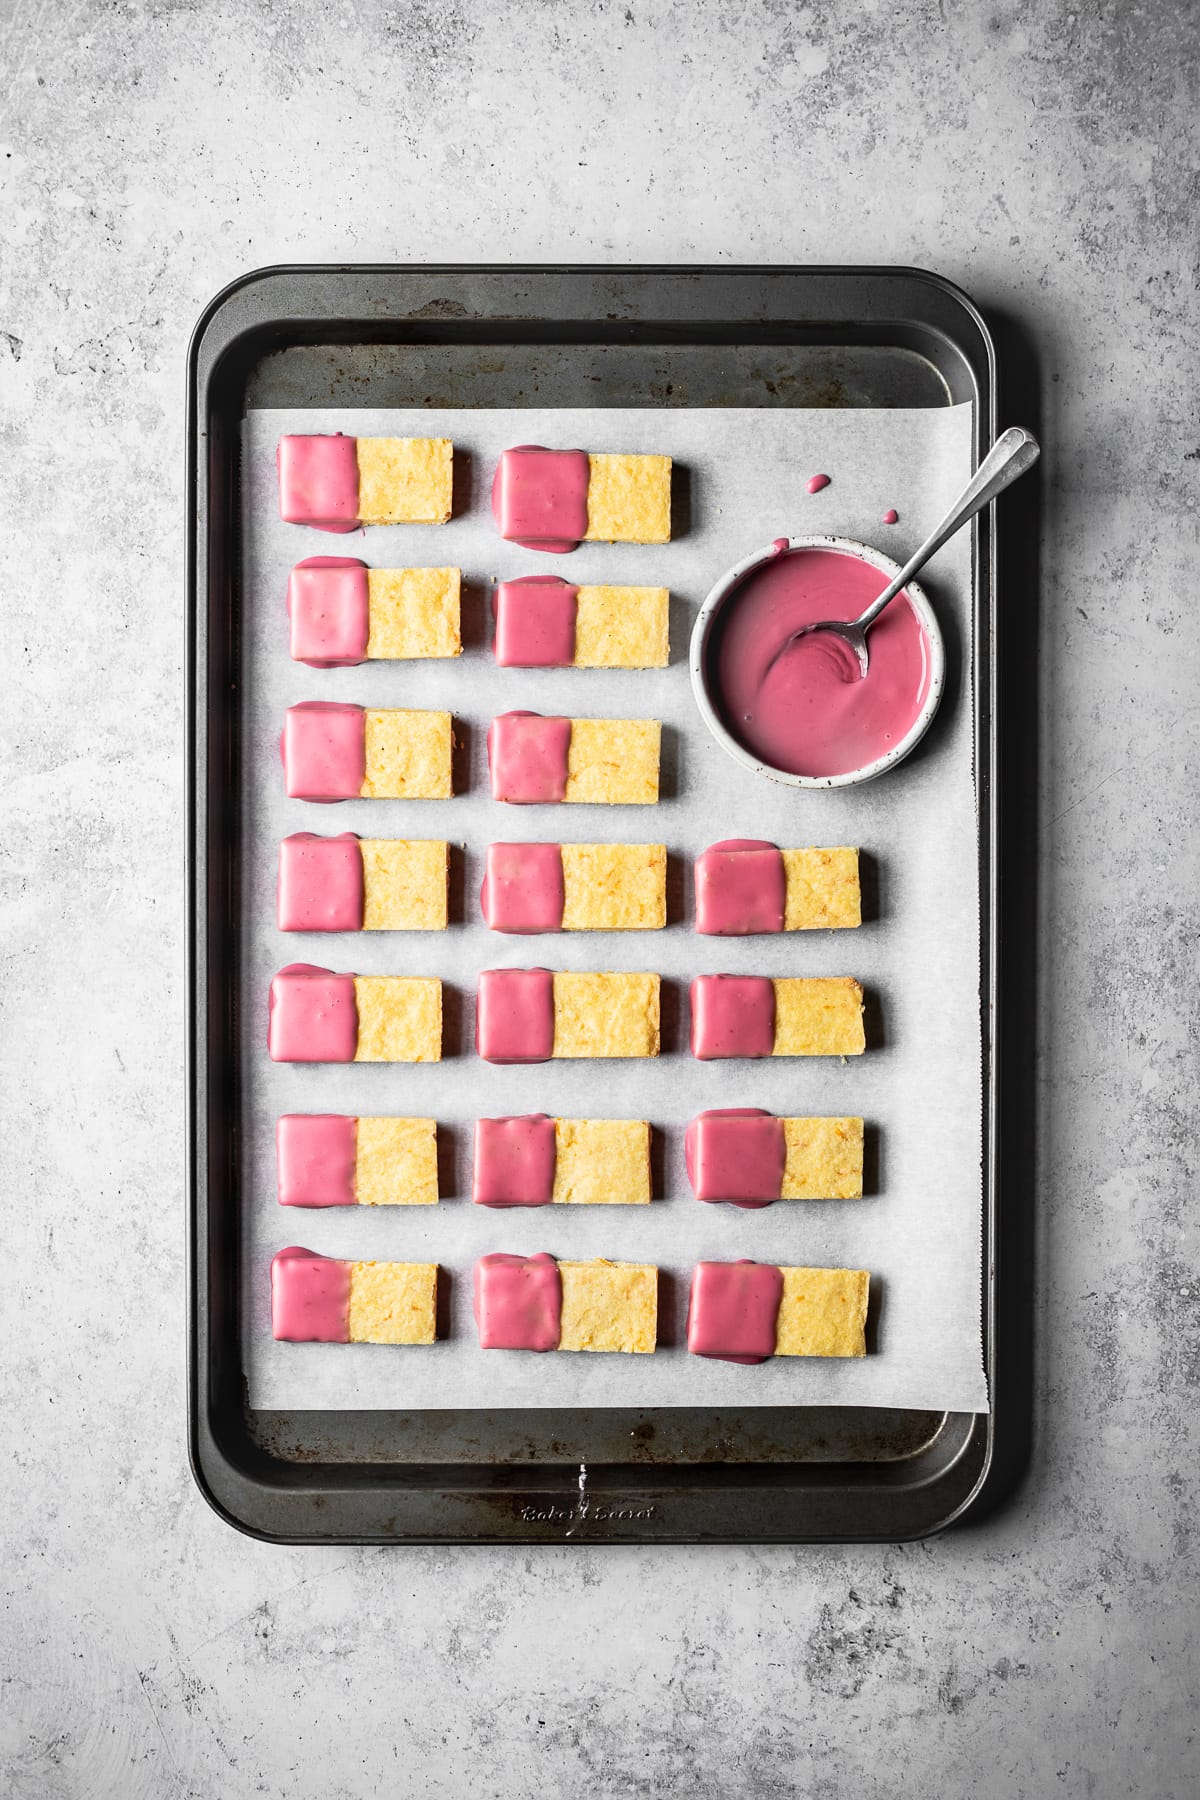 Top view of rows of yellow cornmeal shortbread cookies dipped in pink glaze drying on a parchment lined cookie sheet